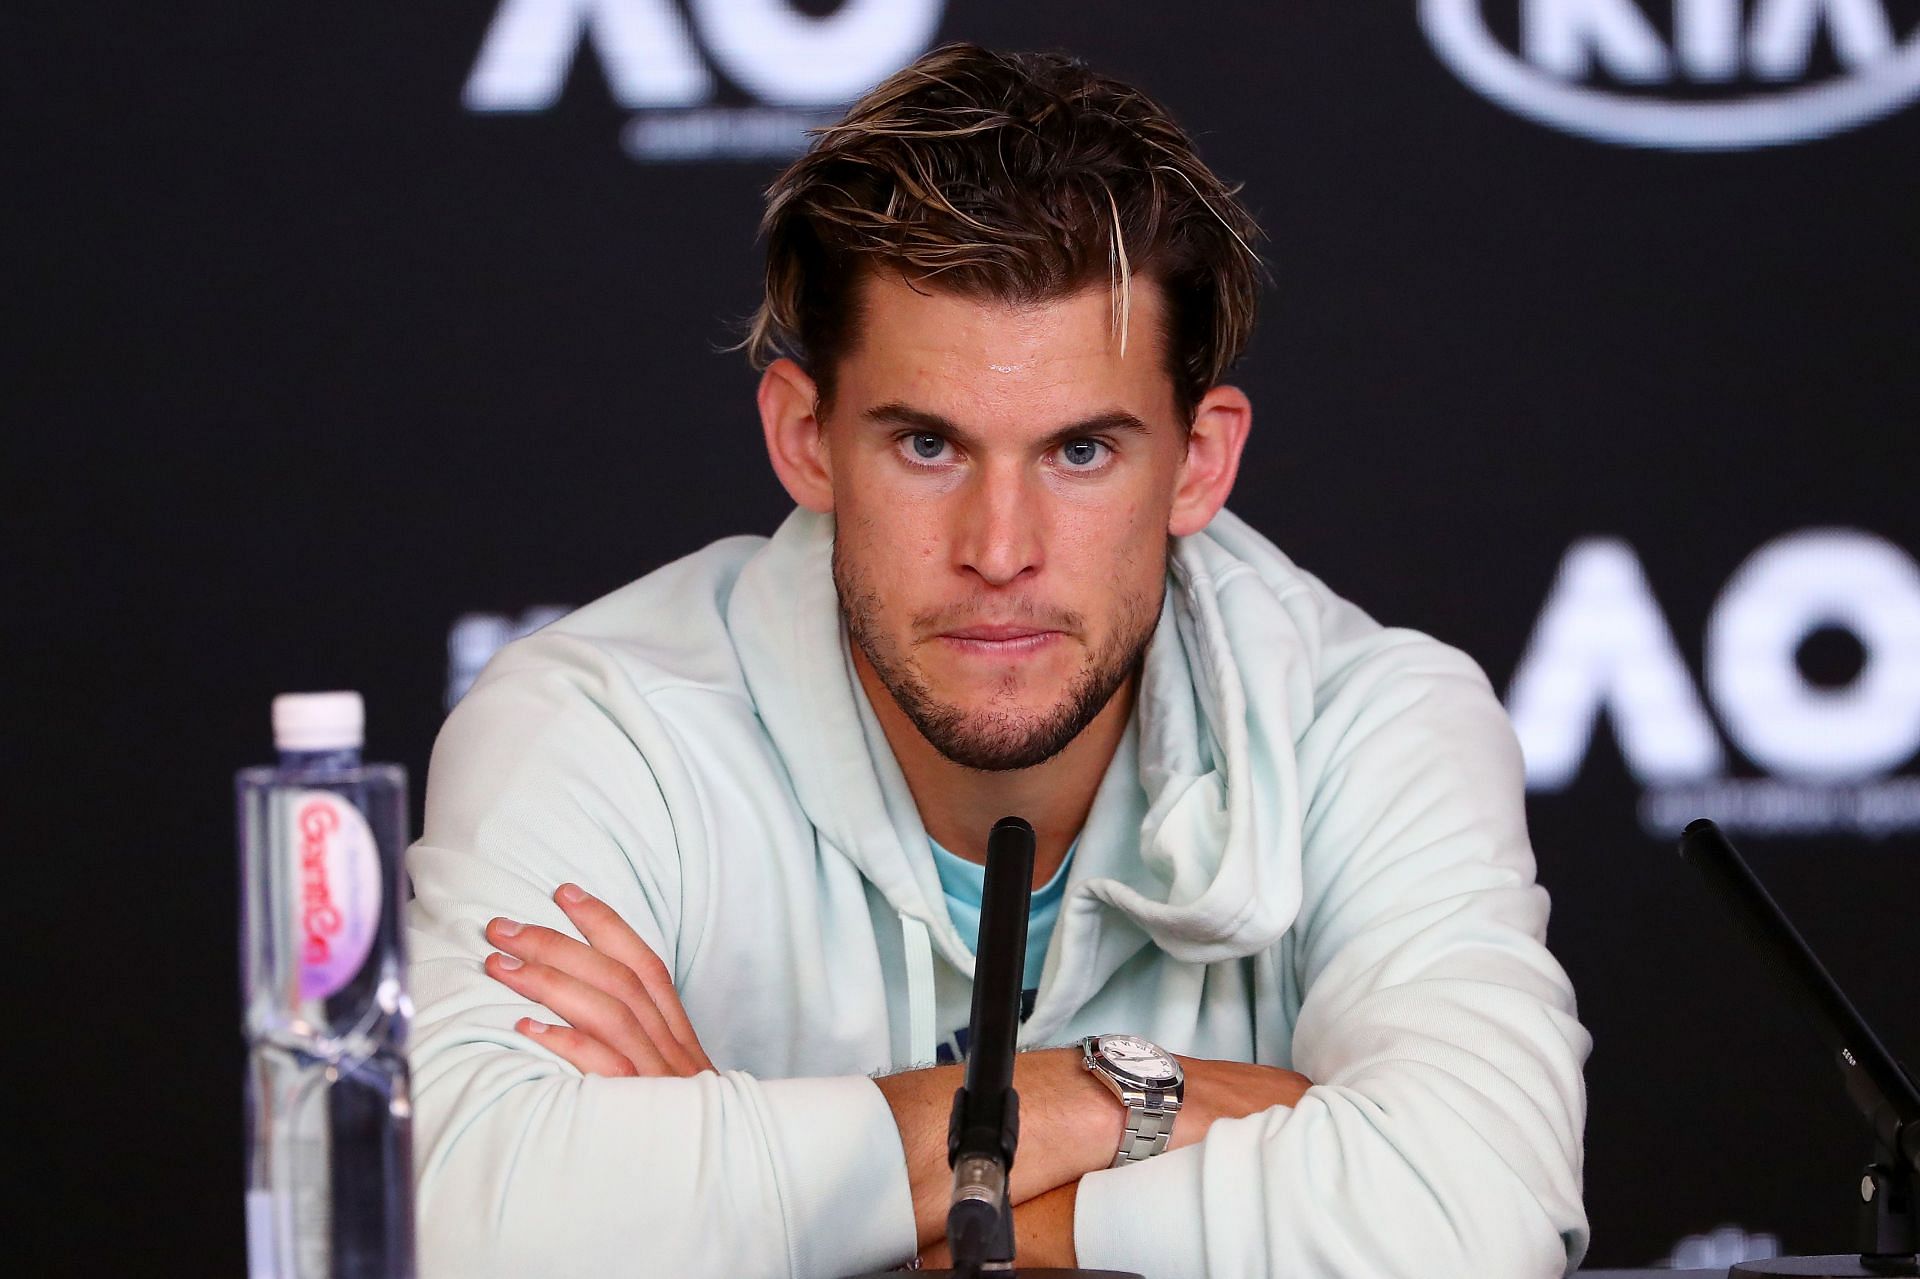 Dominic Thiem at a press conference.